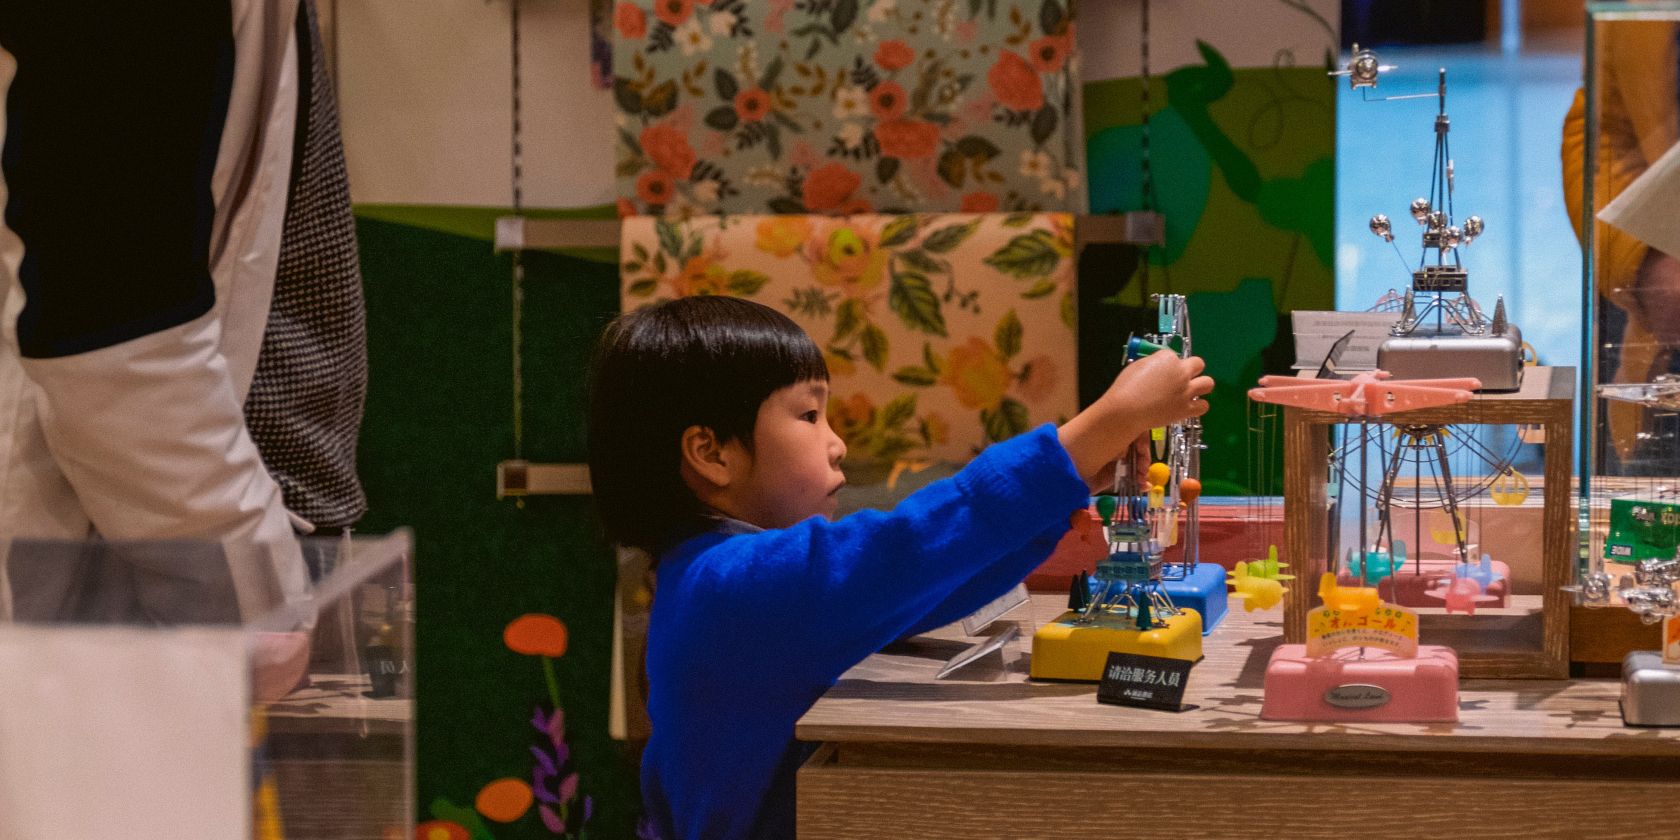 Photo of a child creating something on a table